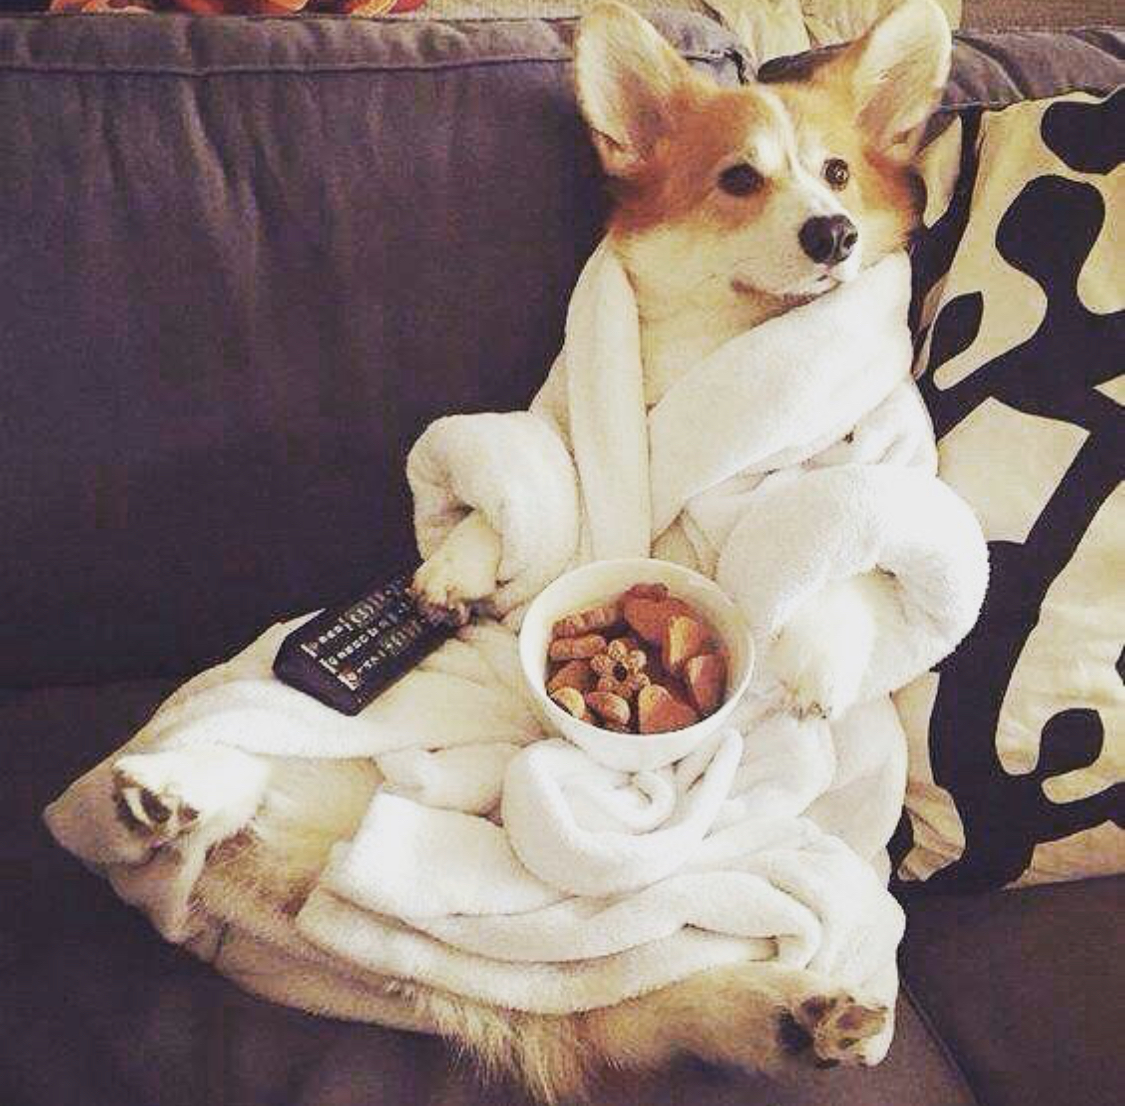 Corgi wearing a bath robe while sitting on the couch with a bowl of treats and remote in its lap